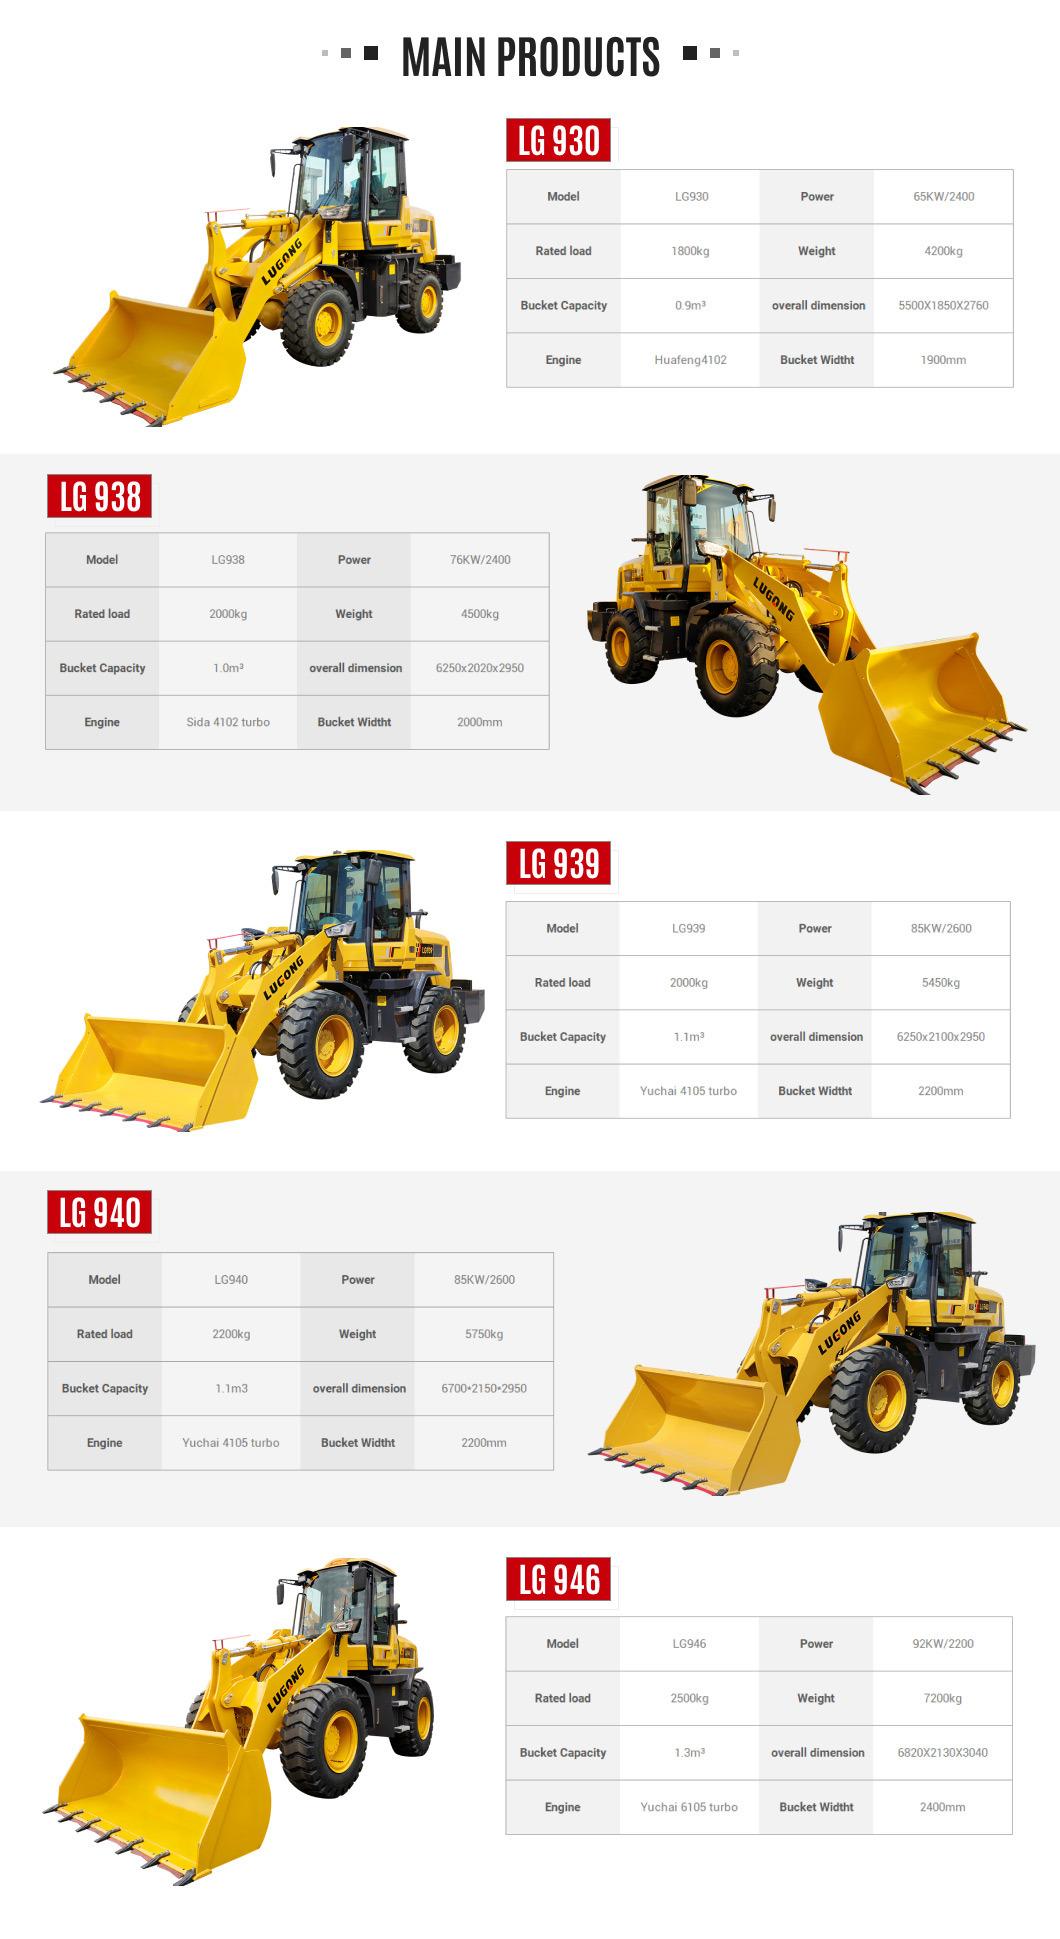 China CE ISO EPA New/Top Brand/Official/Cheap 3ton T920 Small Front End Loader with Attachment Parts Price List for Sale